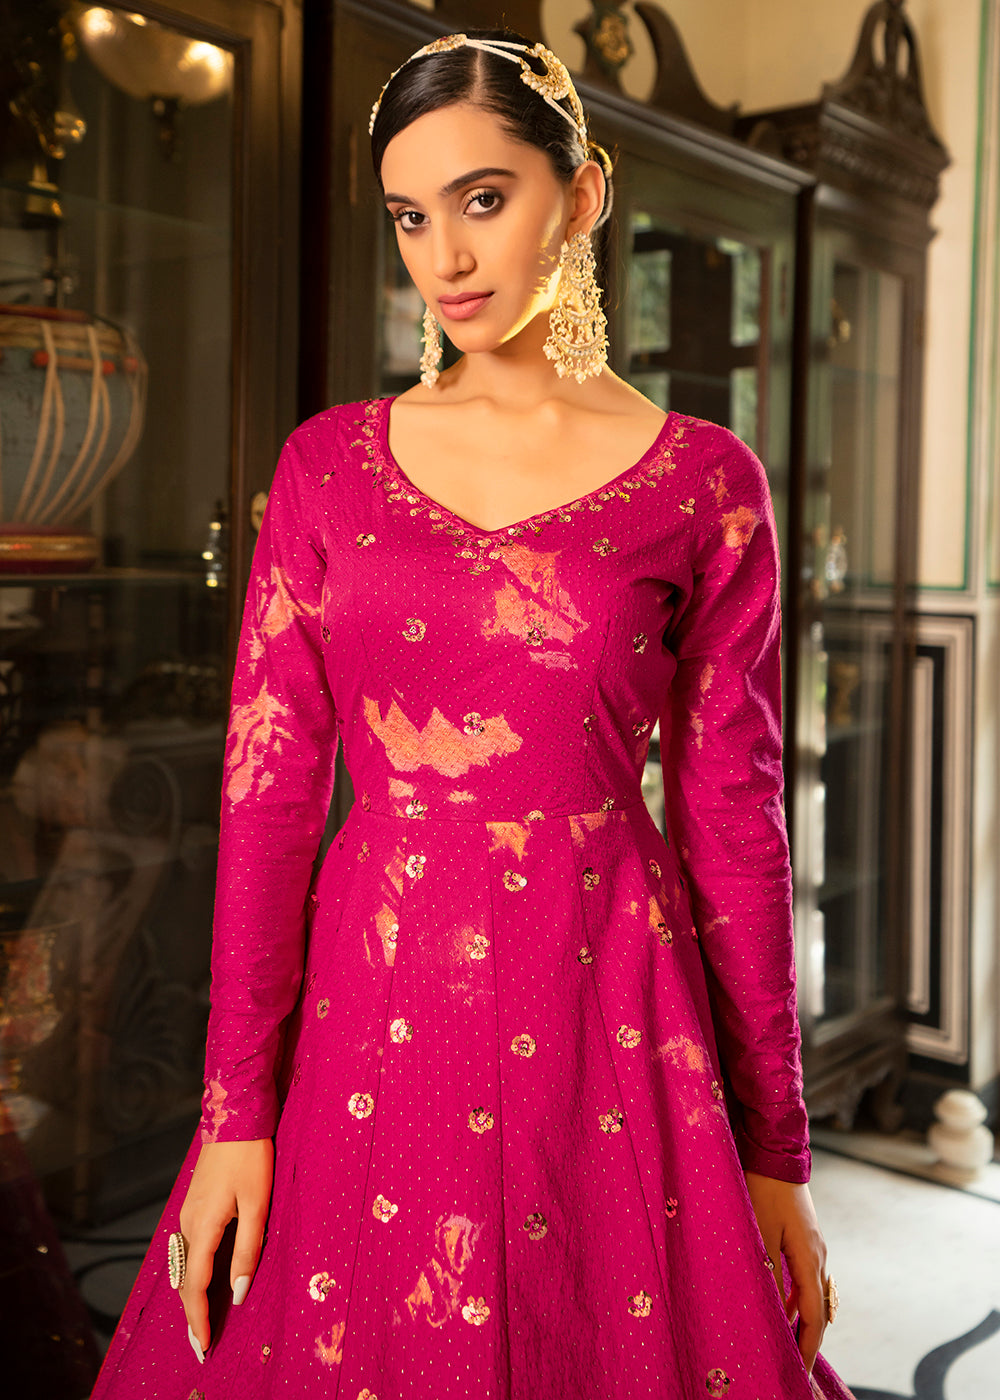 Buy Now Rani Pink Shibori Print Embroidered Floor Length Cotton Gown Online in USA, UK, Australia, New Zealand, Canada & Worldwide at Empress Clothing.